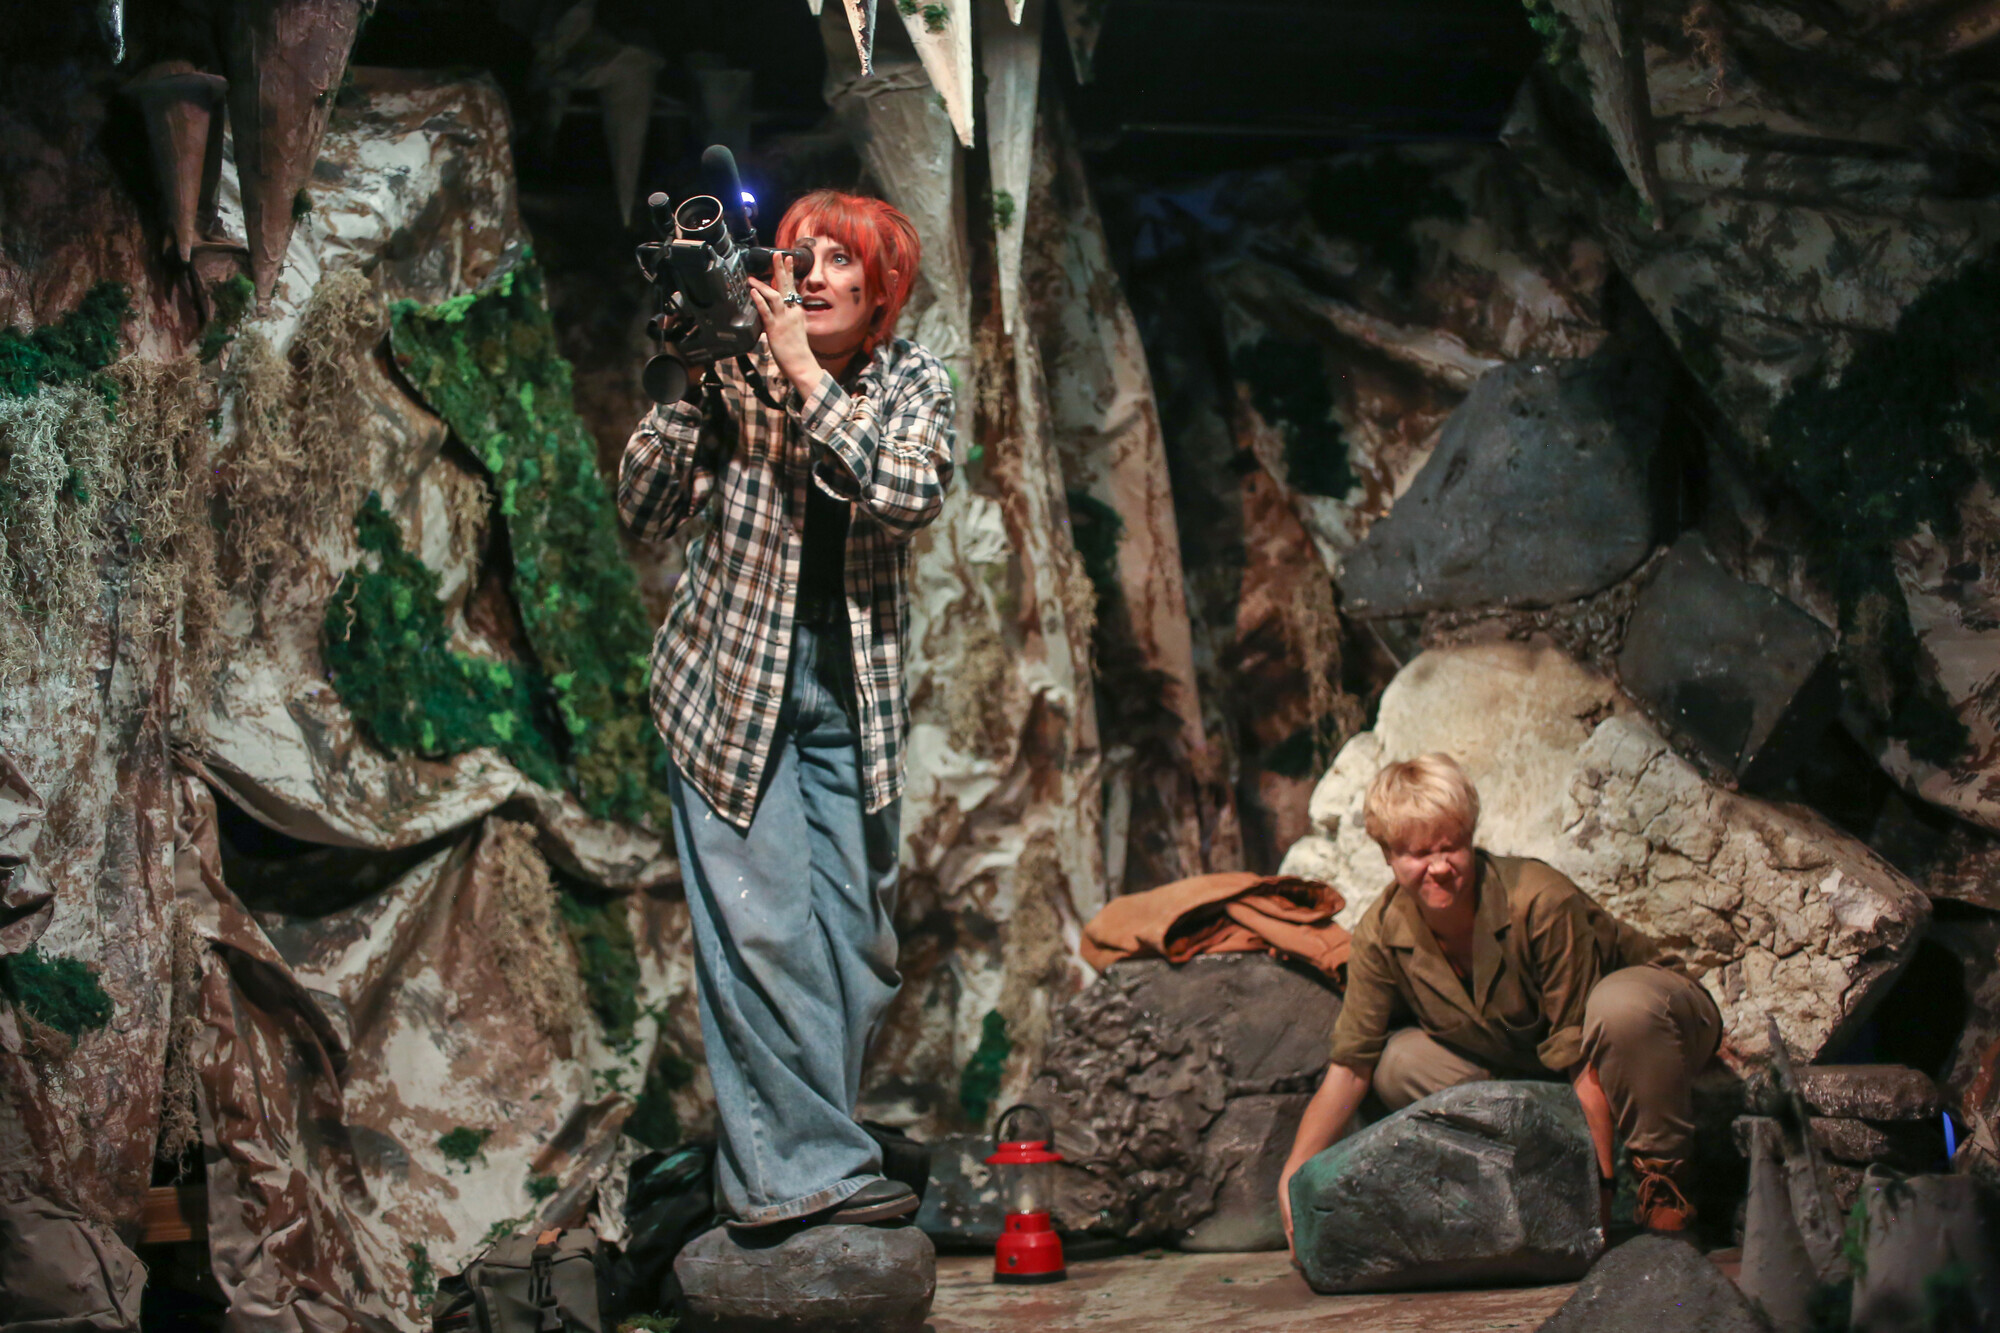 A performer uses a camera while another pushes a prop boulder.